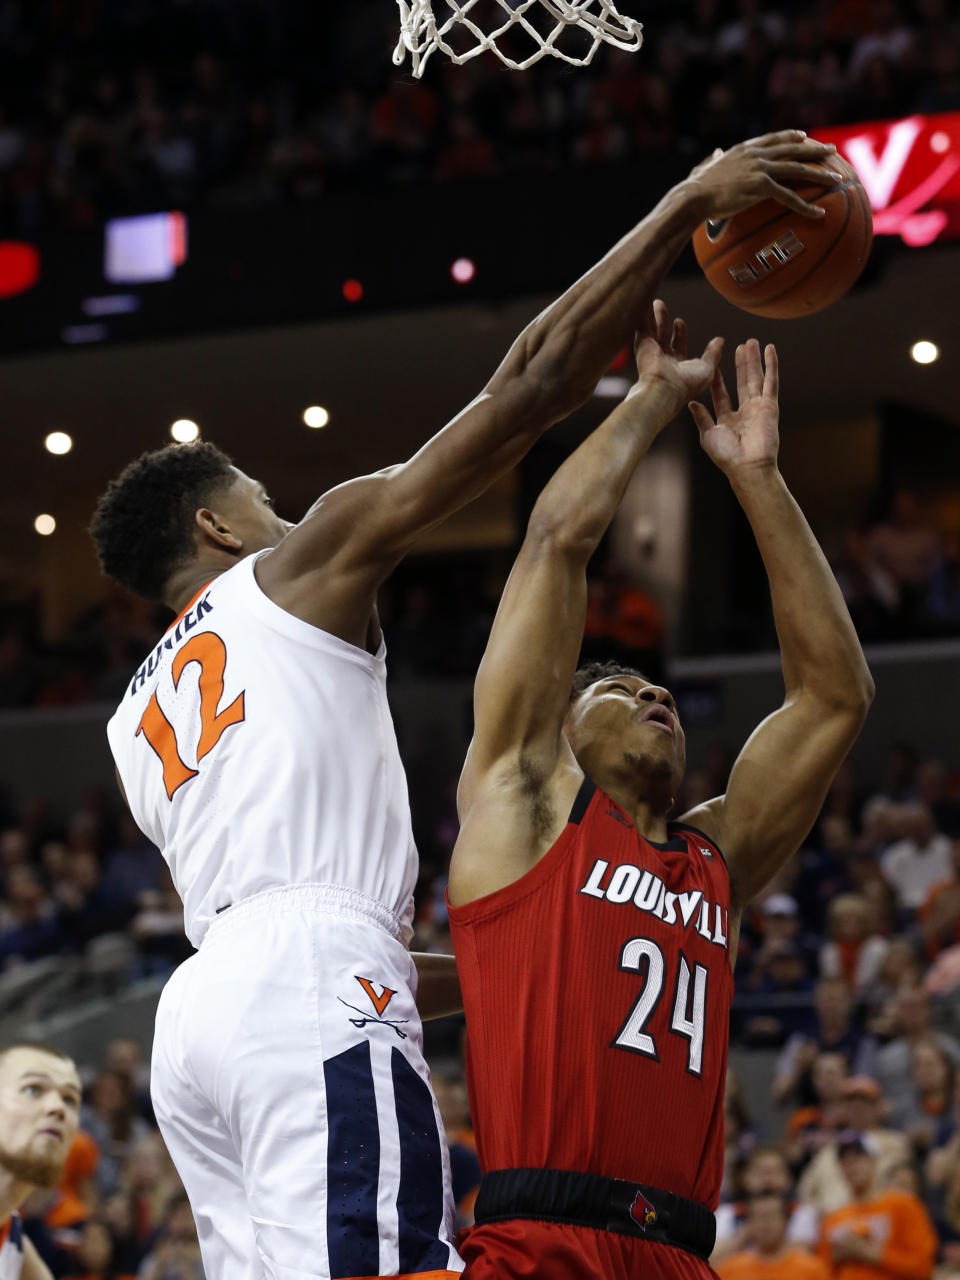 Virginia guard De'Andre Hunter (12) blocks the shot of Louisville forward Dwayne Sutton (24) during the first half of an NCAA college basketball game in Charlottesville, Va., Saturday, March 9, 2019. (AP Photo/Steve Helber)